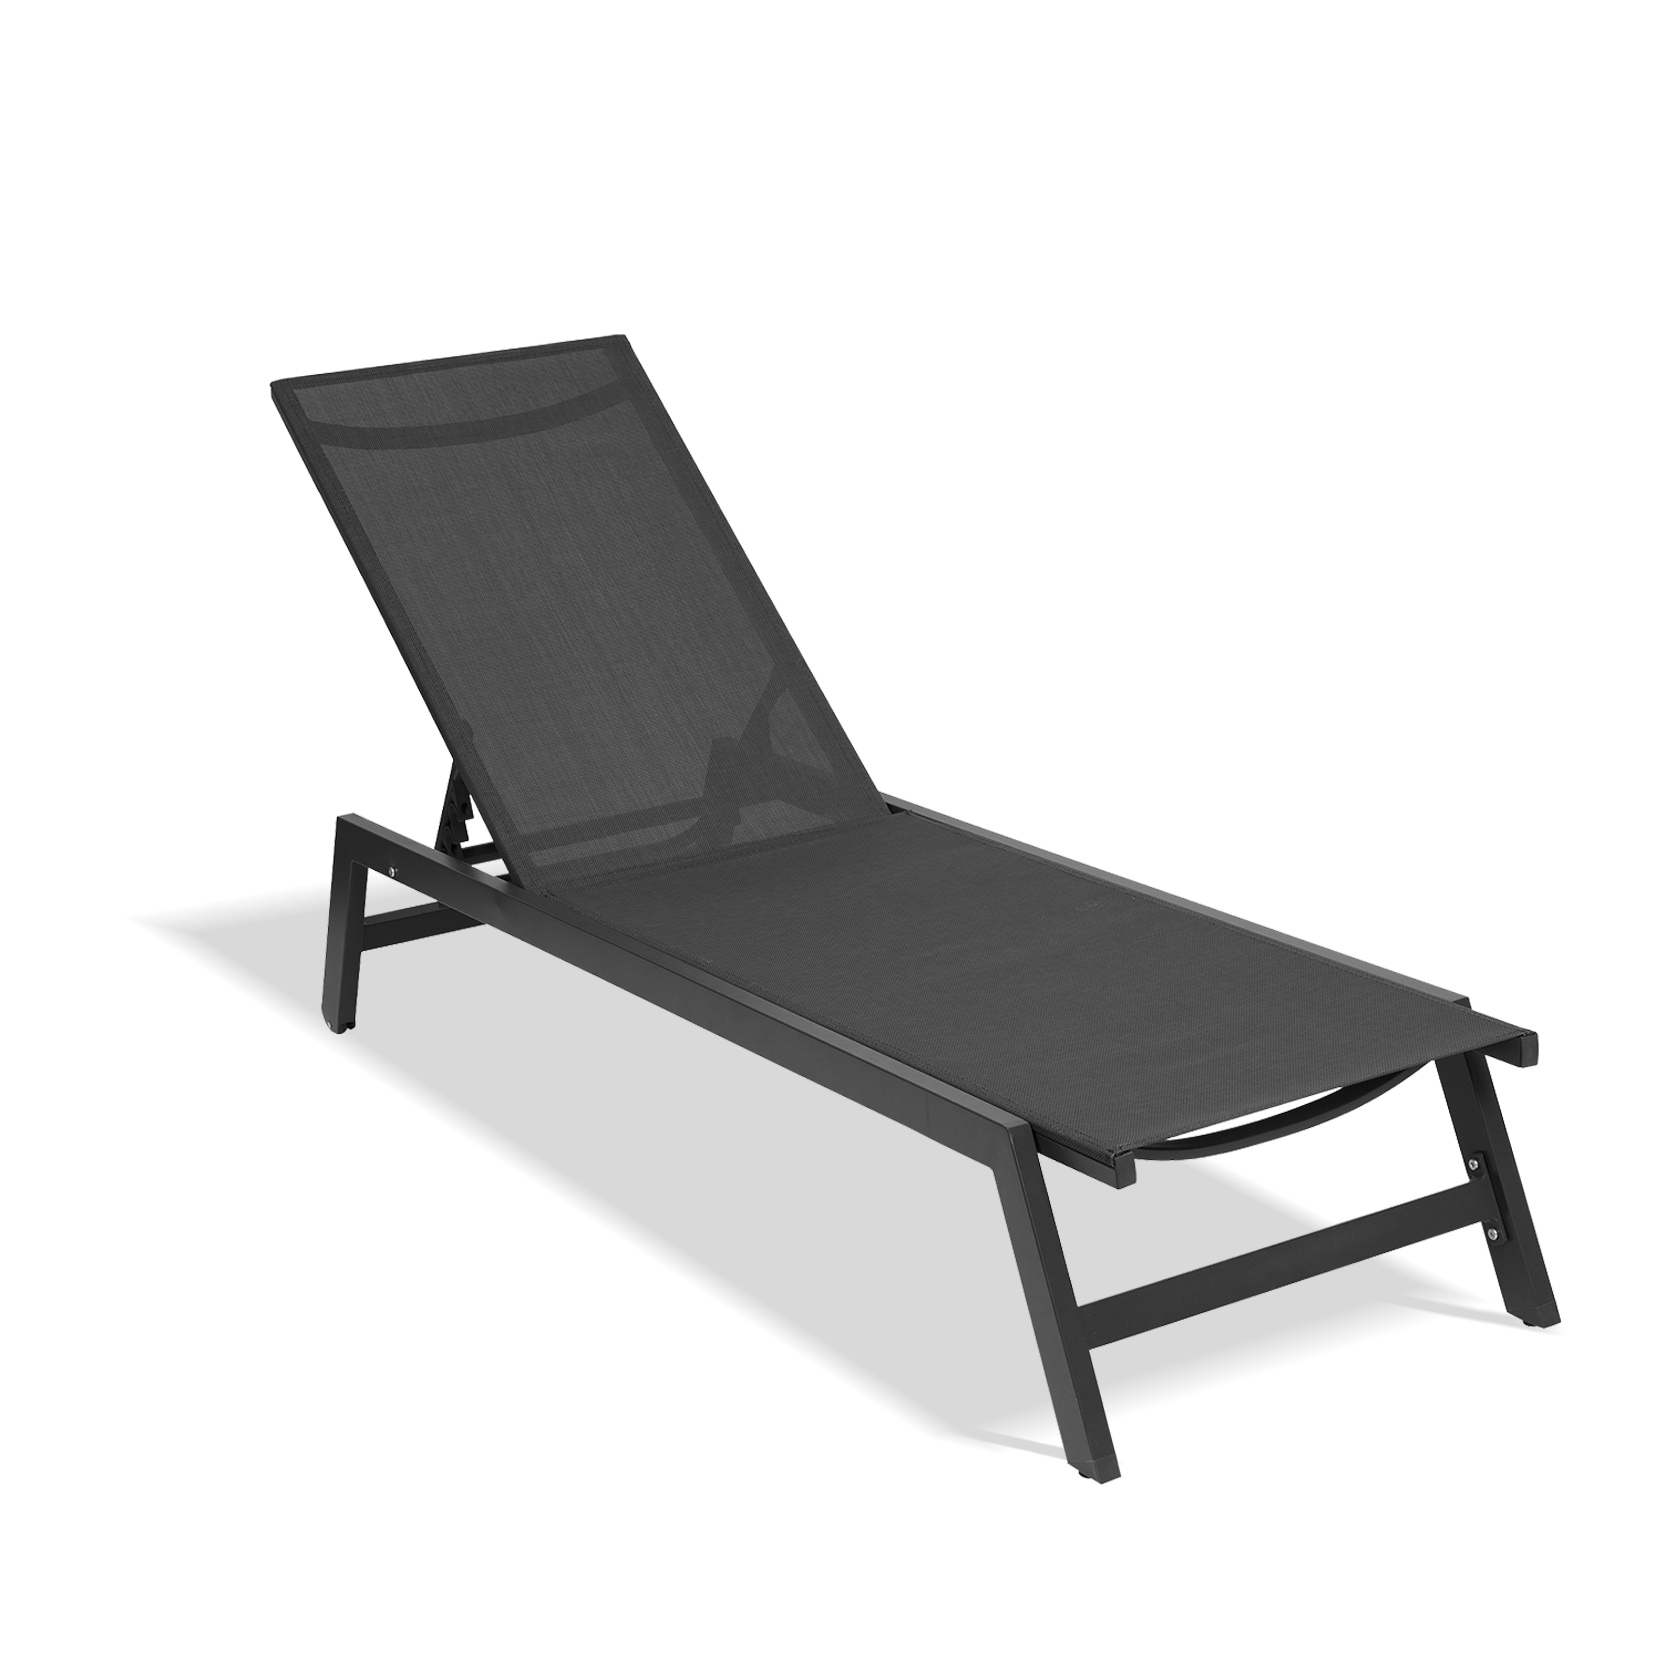 5-position Adjustable Aluminum Recliner  All-weather Seating For Patio  Beach  Yard  and Pool.